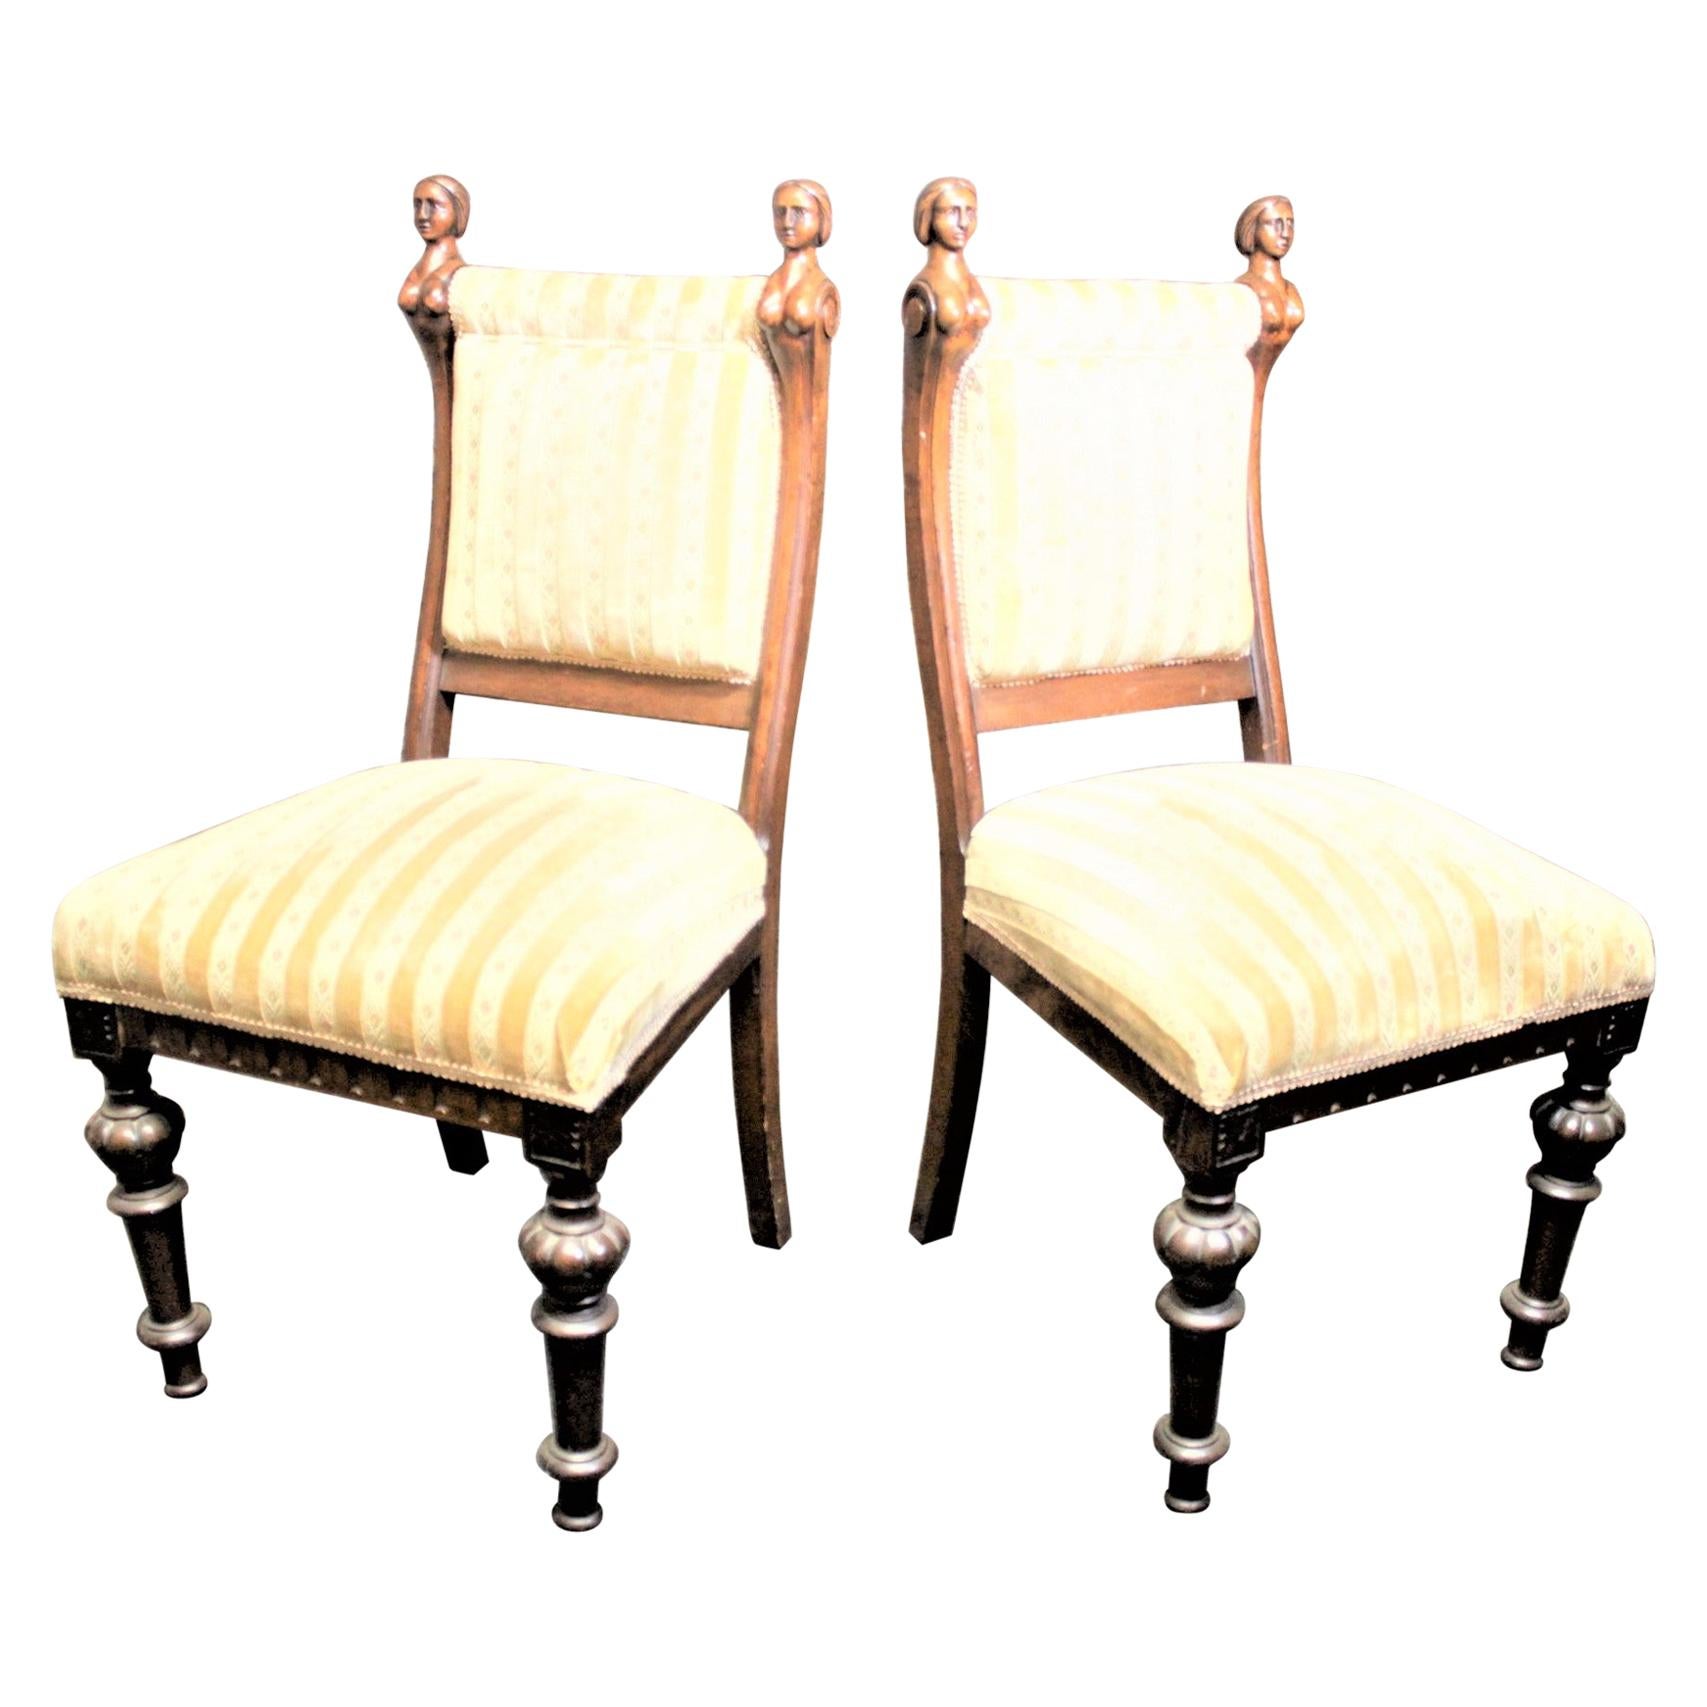 Pair of Antique American Carved Walnut Parlor Chairs with Erotic Female Accents For Sale